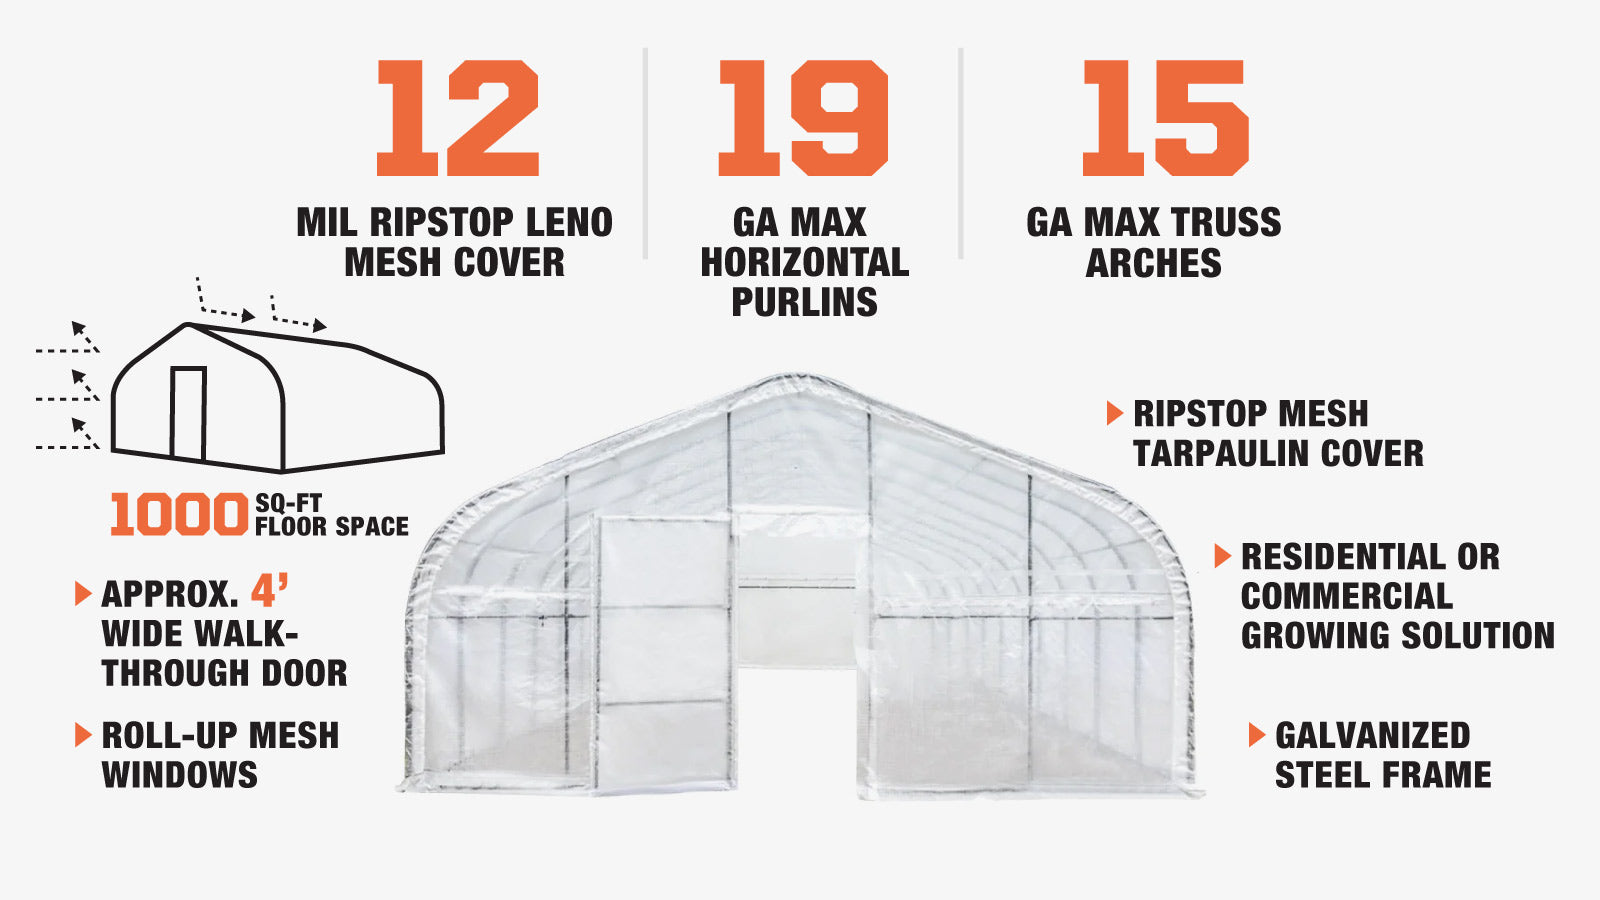 TMG Industrial 20' x 50' Tunnel Greenhouse Grow Tent with 12 Mil Ripstop Leno Mesh Cover, Cold Frame, Roll-up Windows, Peak Ceiling Roof, TMG-GH2050-description-image